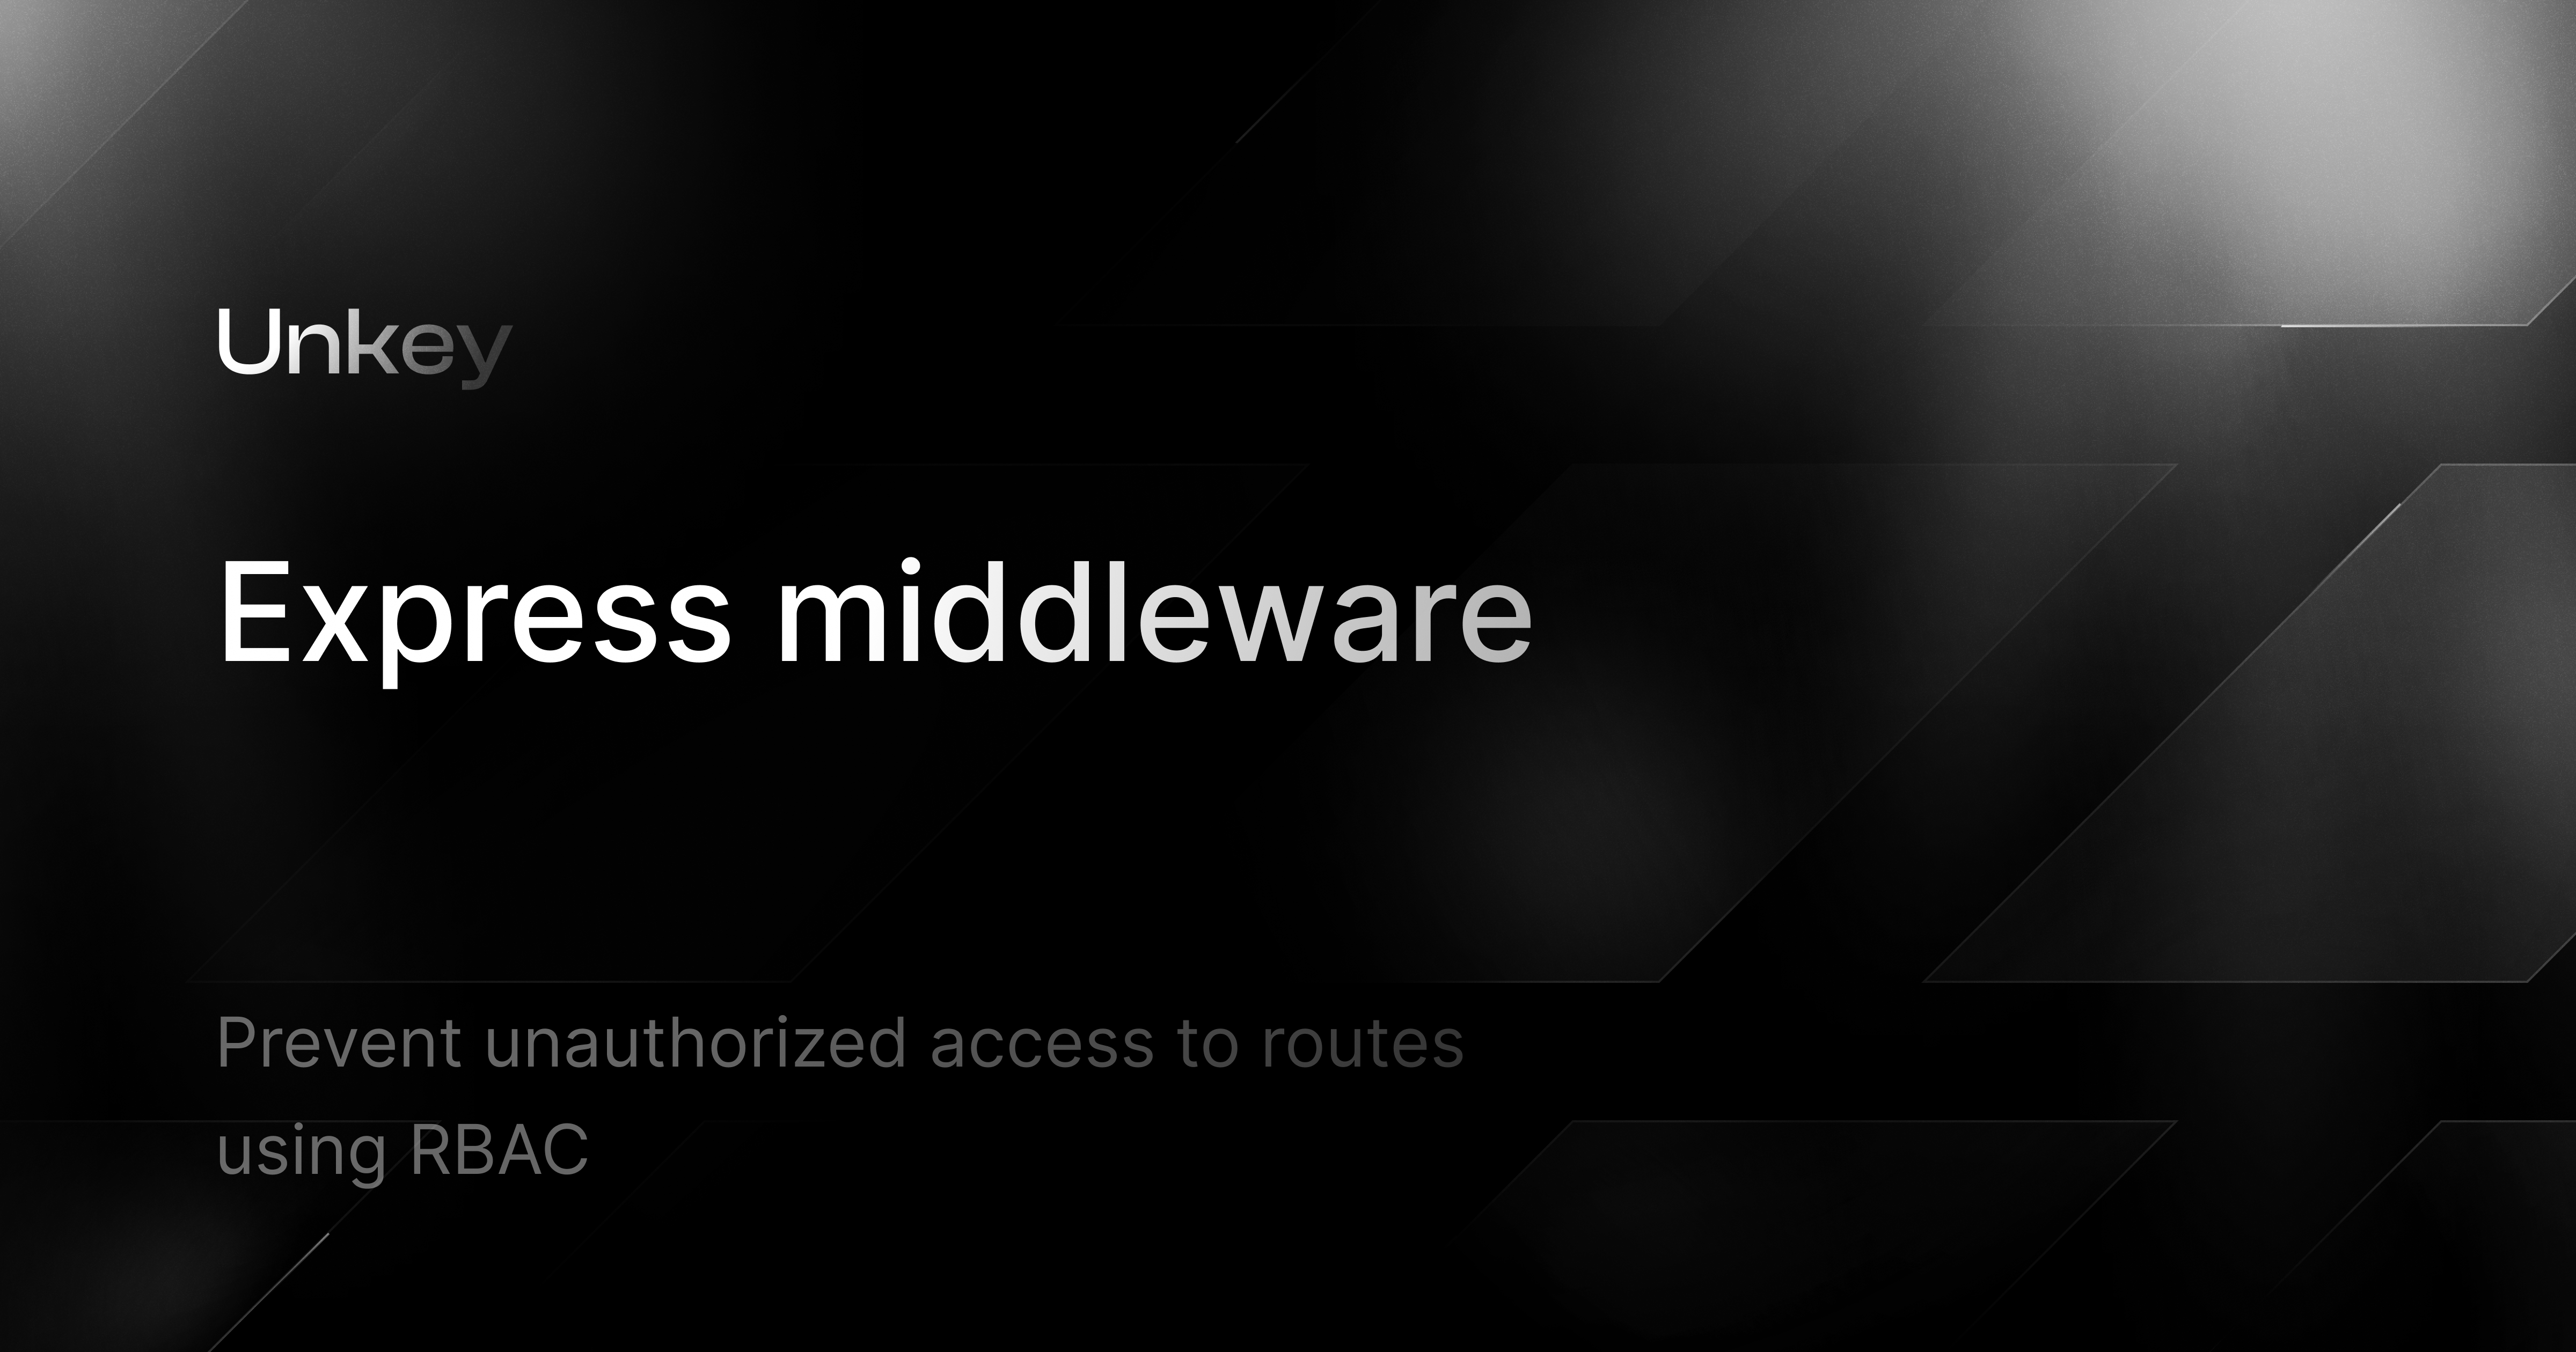 Prevent unauthorized access to routes using RBAC